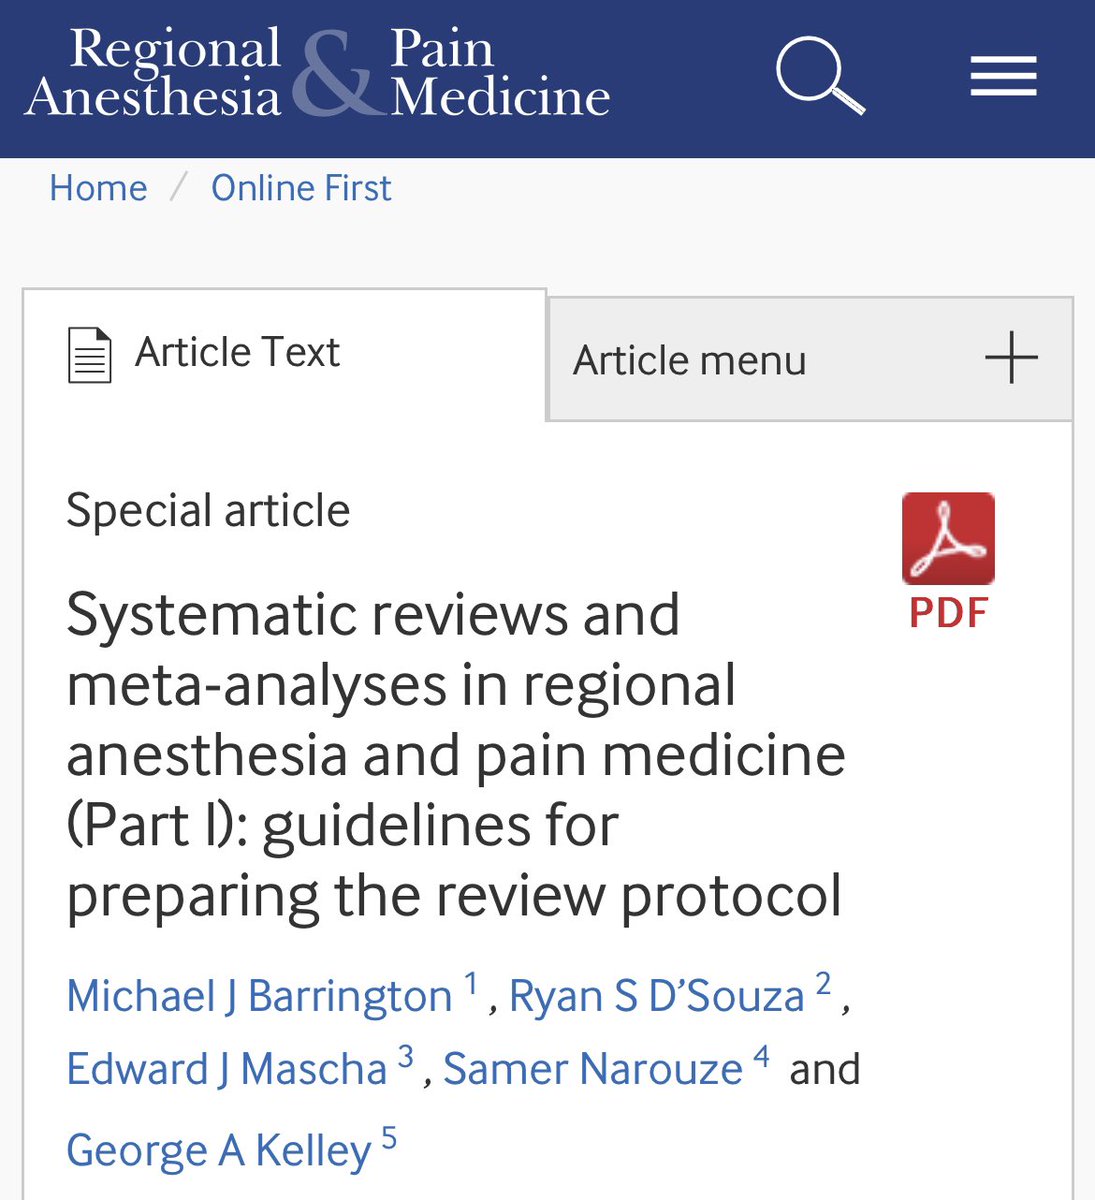 🔍 Part 1 delves into how to craft protocols for systematic reviews/meta-analyses. 📑 Link to Part 1 @RAPMOnline: rapm.bmj.com/content/early/… Link to Part 1 @IARS_Journal: journals.lww.com/anesthesia-ana… @barringtonmj @NarouzeMD @sites_brian @ASRA_Society @ESRA_Society @nasir418